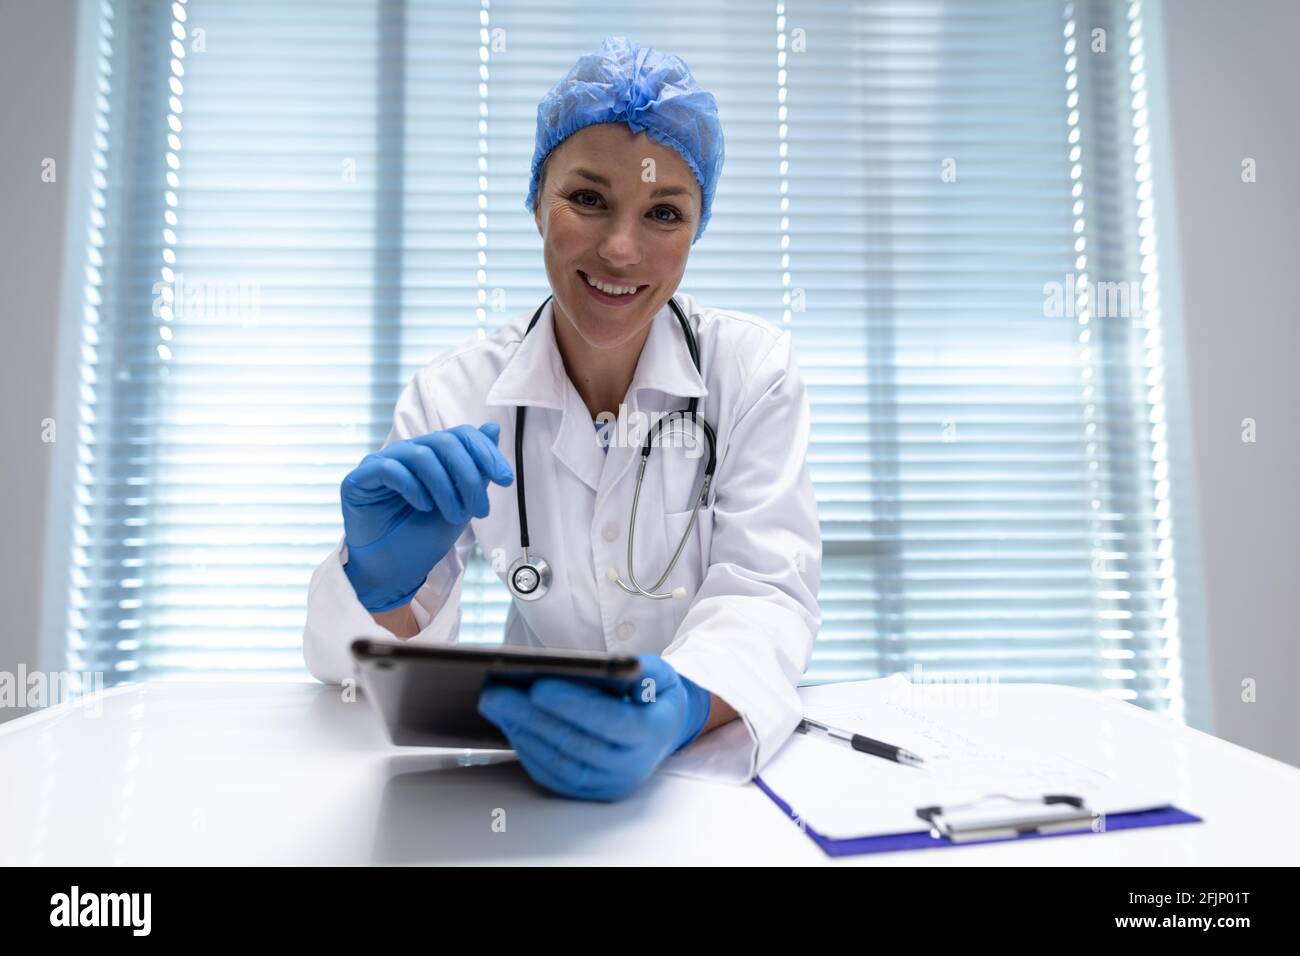 Caucasian female doctor at desk using tablet and smiling during video call consultation Stock Photo